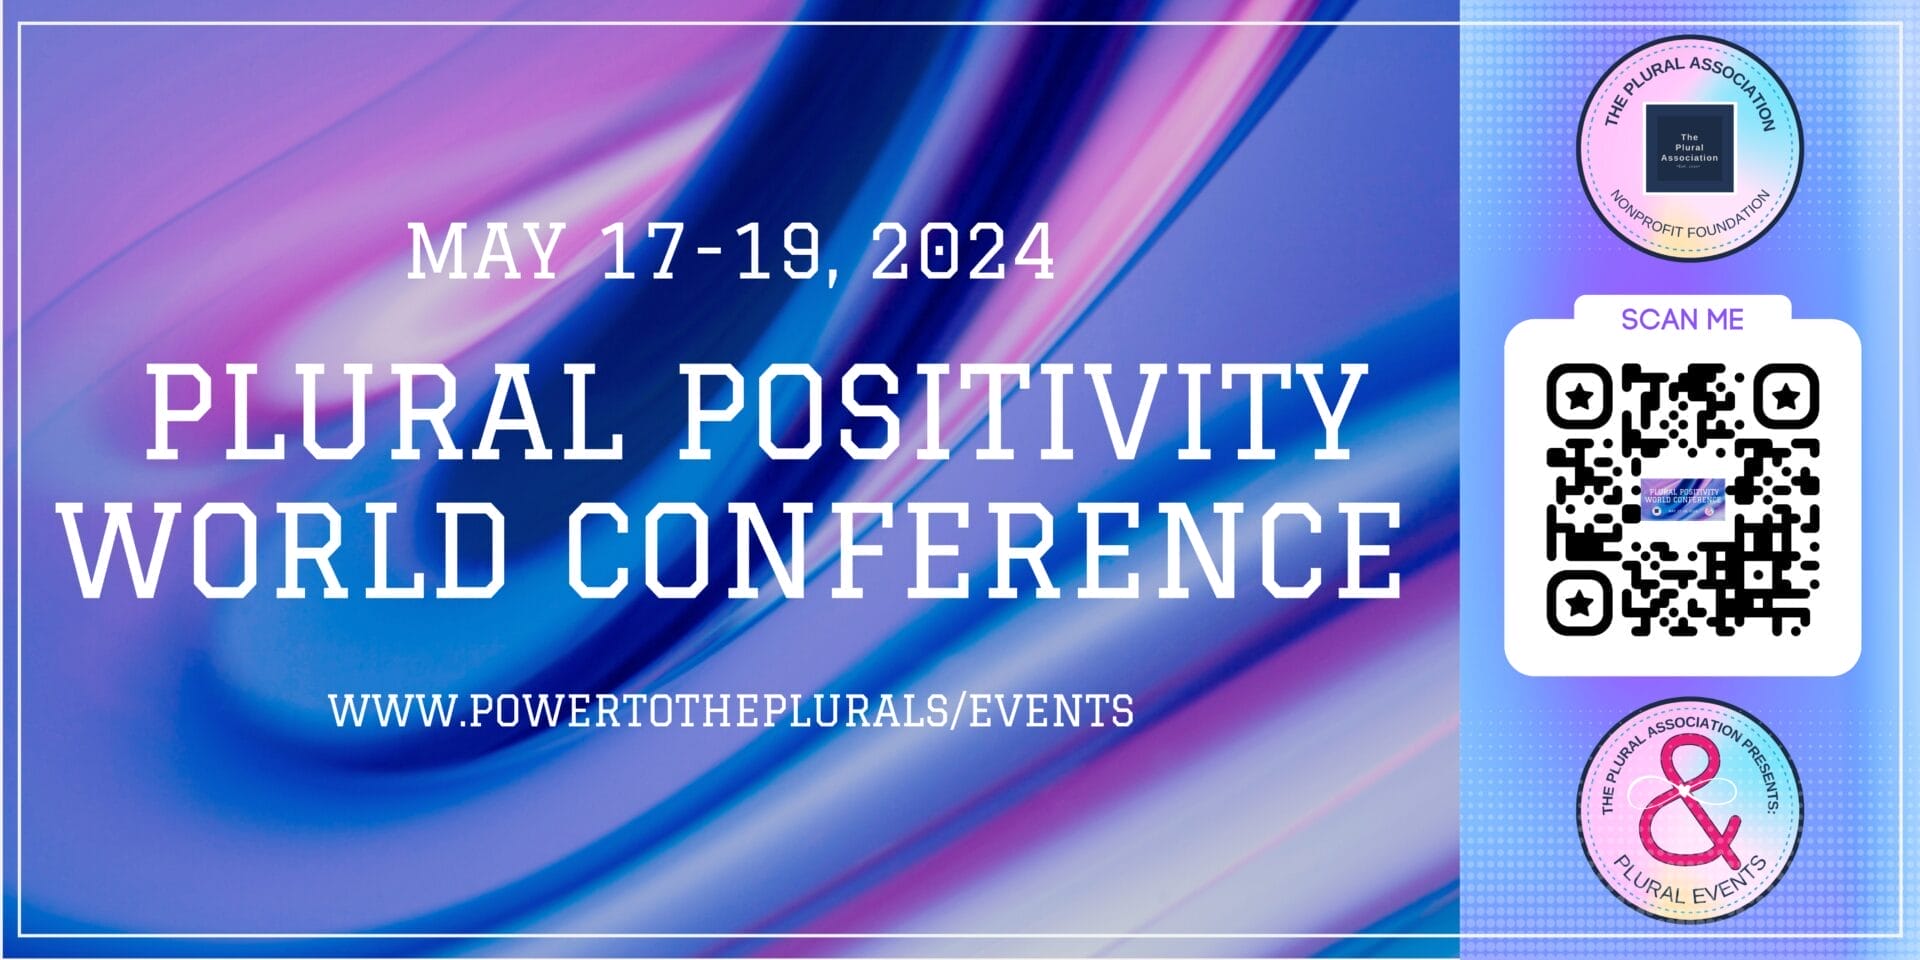 Plural Positivity World Conference, May 17-19, 2024. And a QR code to the event.